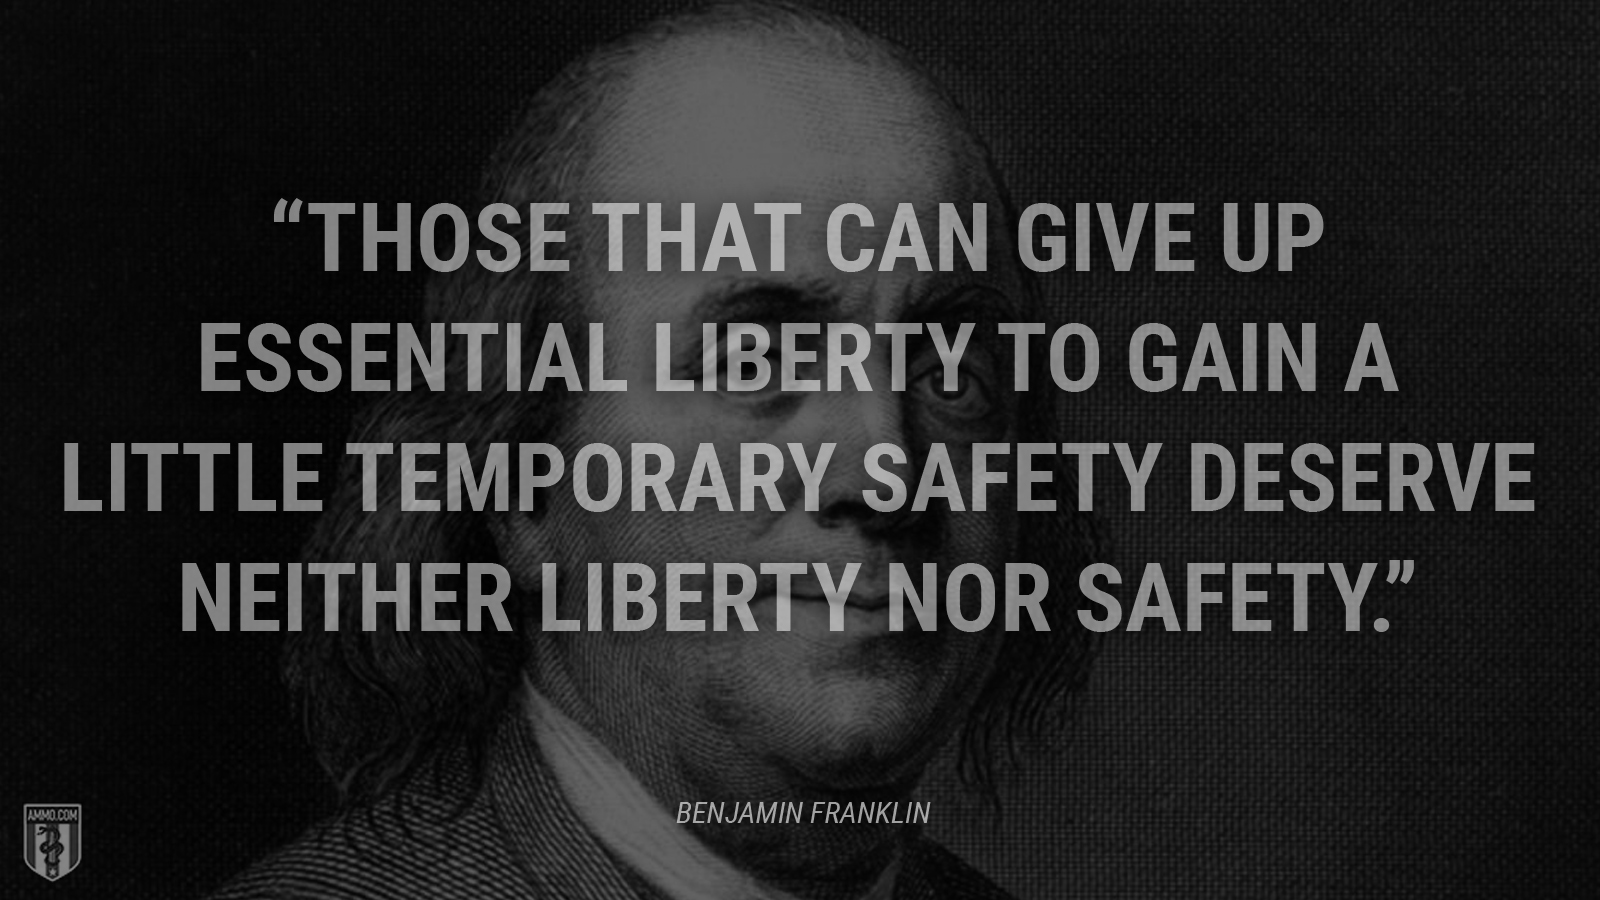 “Those that can give up essential liberty to gain a little temporary safety deserve neither liberty nor safety.” - Benjamin Franklin